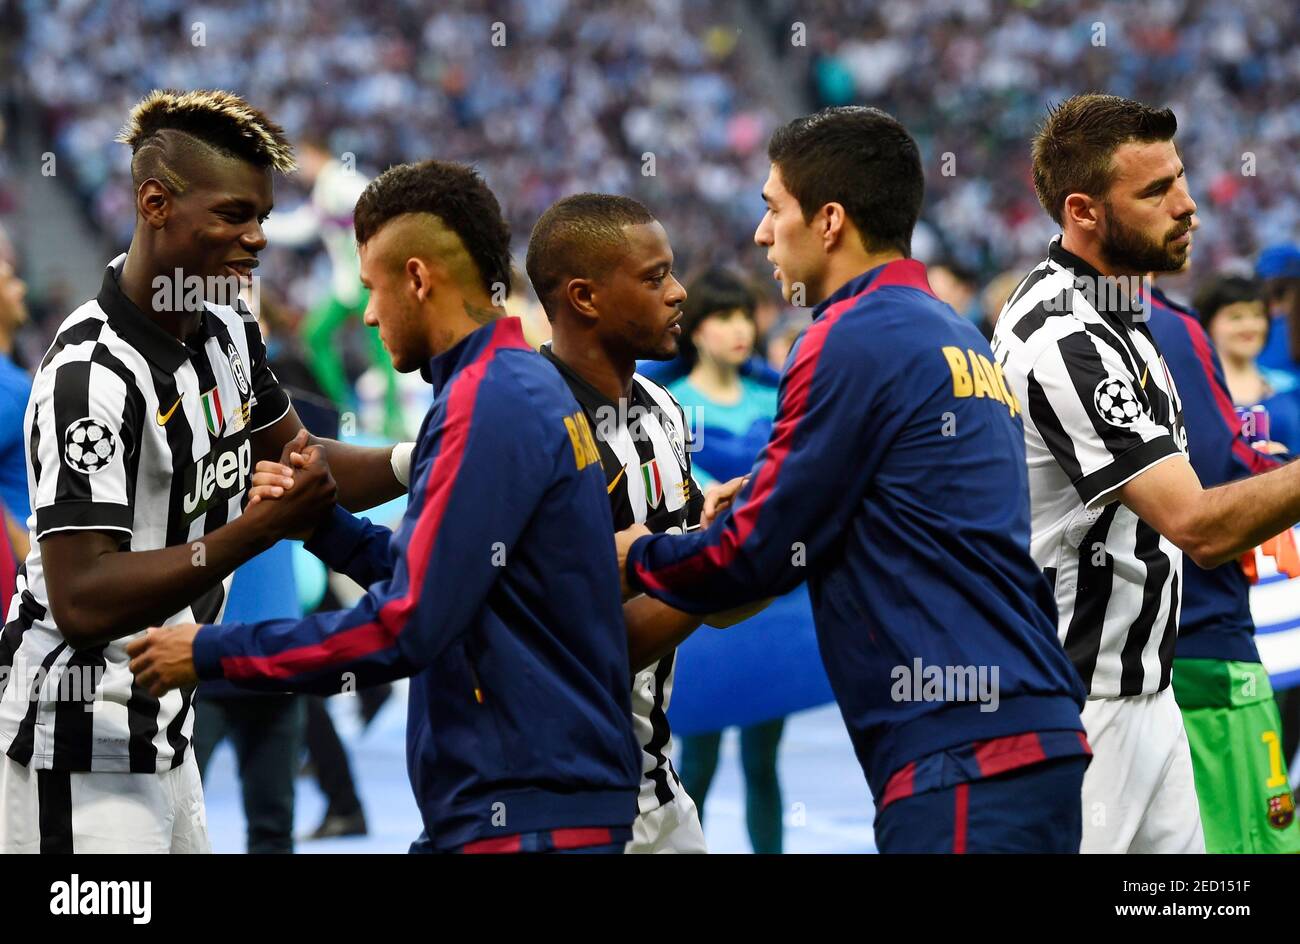 Football Fc Barcelona V Juventus Uefa Champions League Final Olympiastadion Berlin Germany 6 6 15 Barcelona S Luis Suarez Shakes Hands With Juventus Patrice Evra Before The Match Reuters Dylan Martinez Stock Photo Alamy